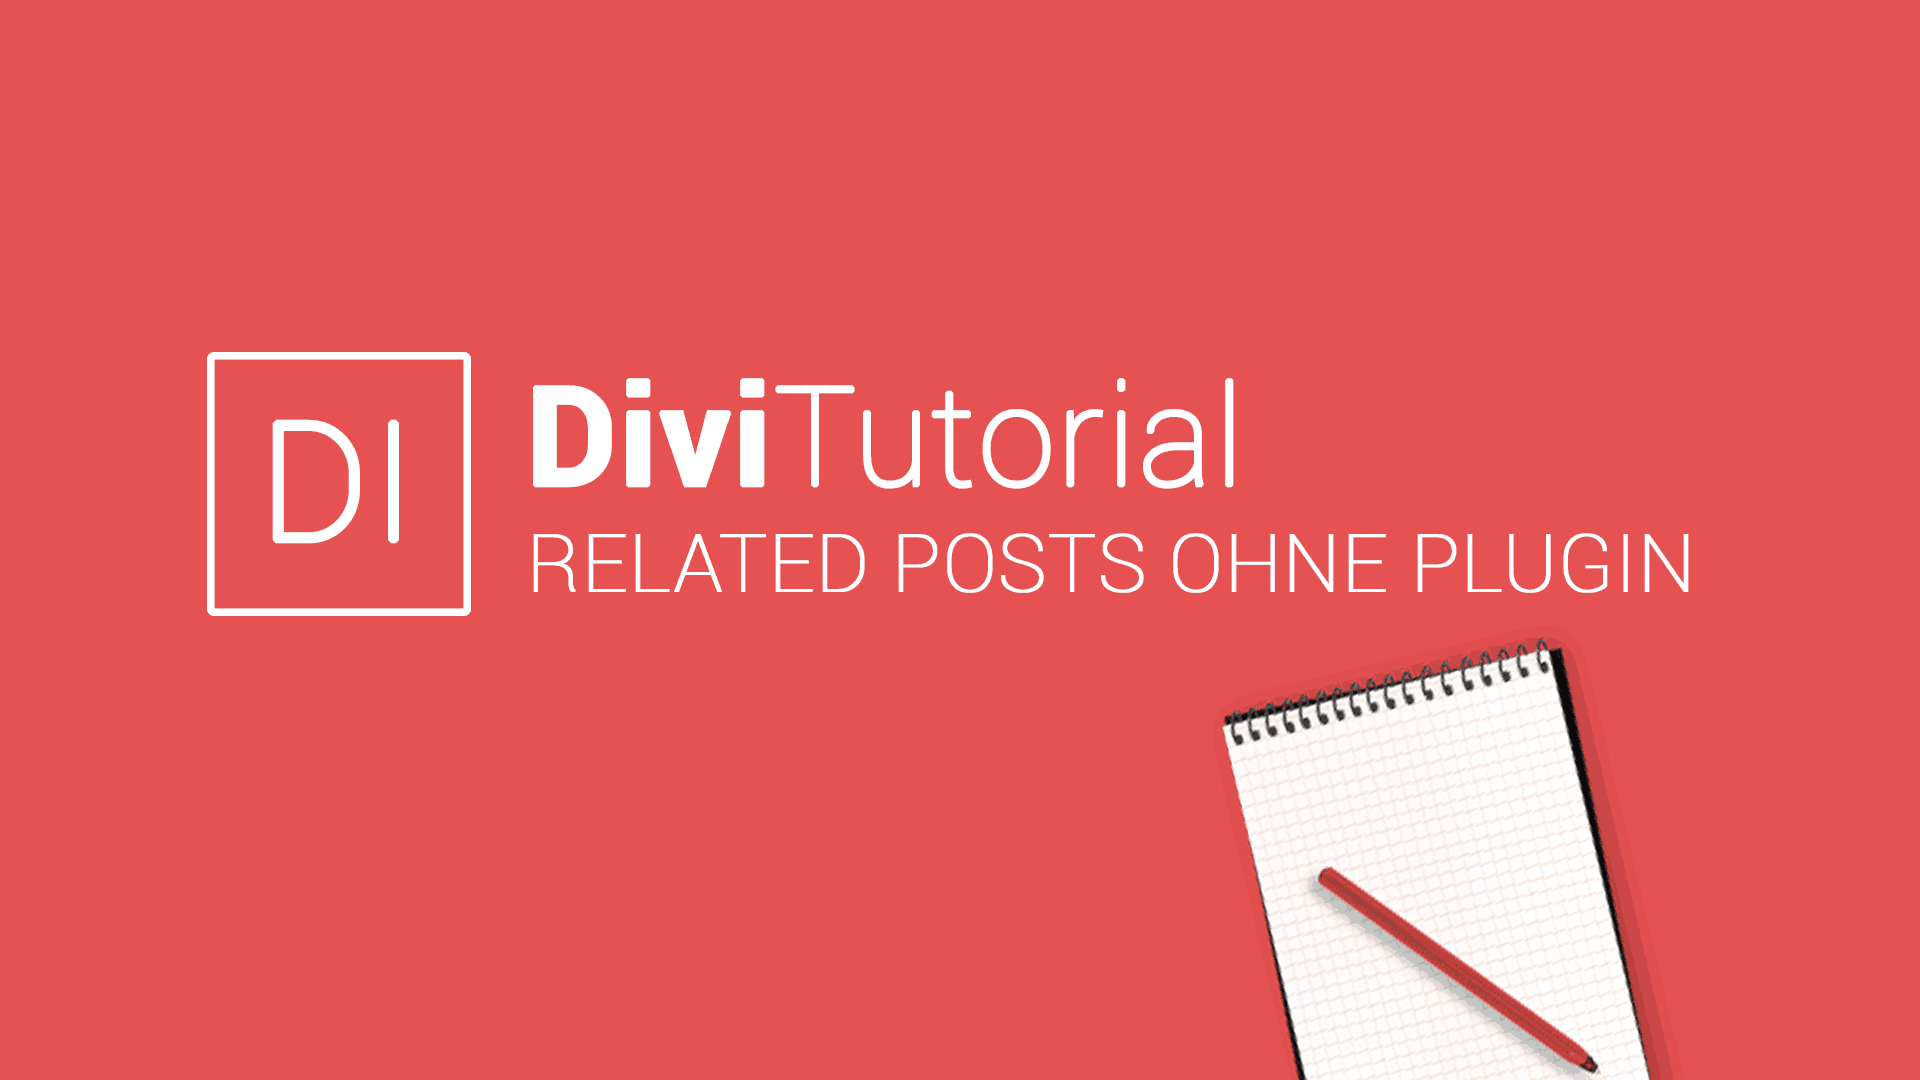 Divi Related Posts Tutorial